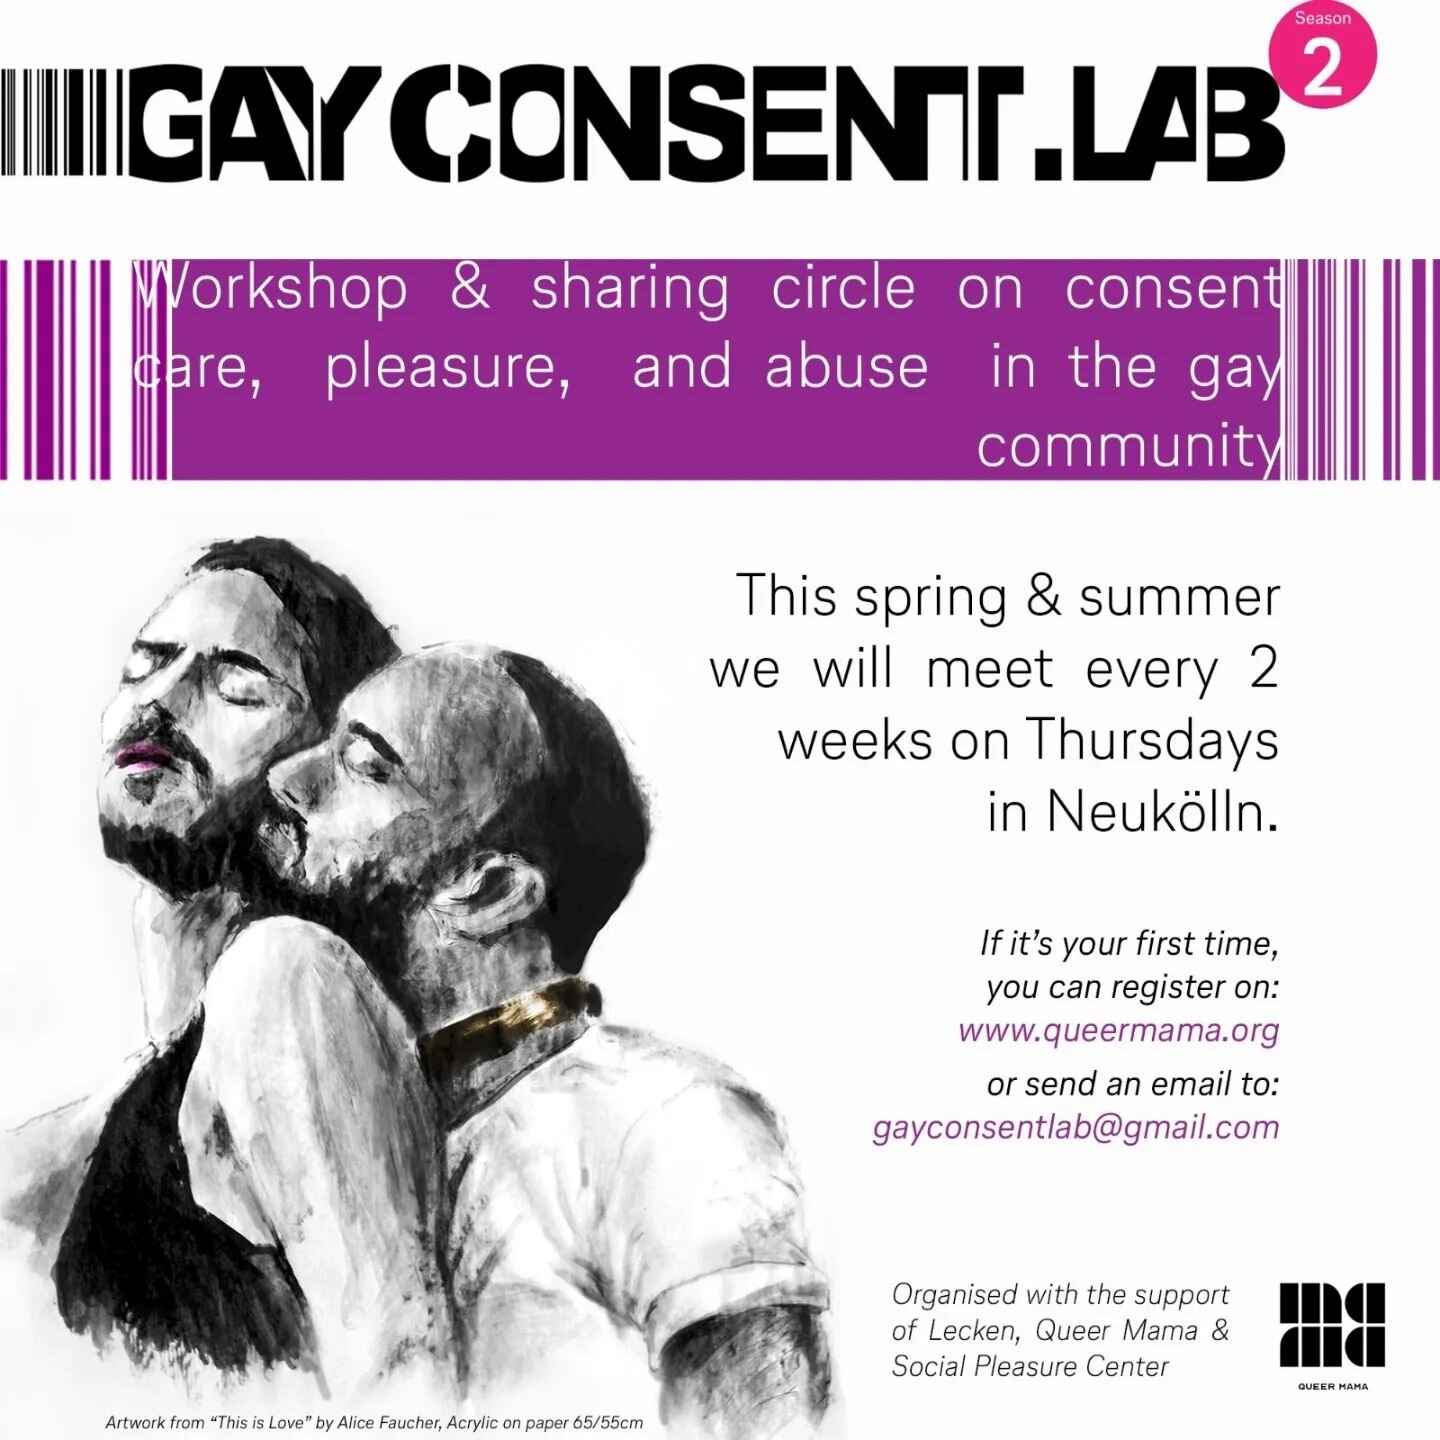 We're back with Gay Consent.Lab Season 2!

Gay Consent.Lab is a workshop &amp; sharing circle on consent, care, pleasure, and abuse in the gay community. During the Lab, we will discuss these issues in the context of sex, drugs, raves and chills.

We